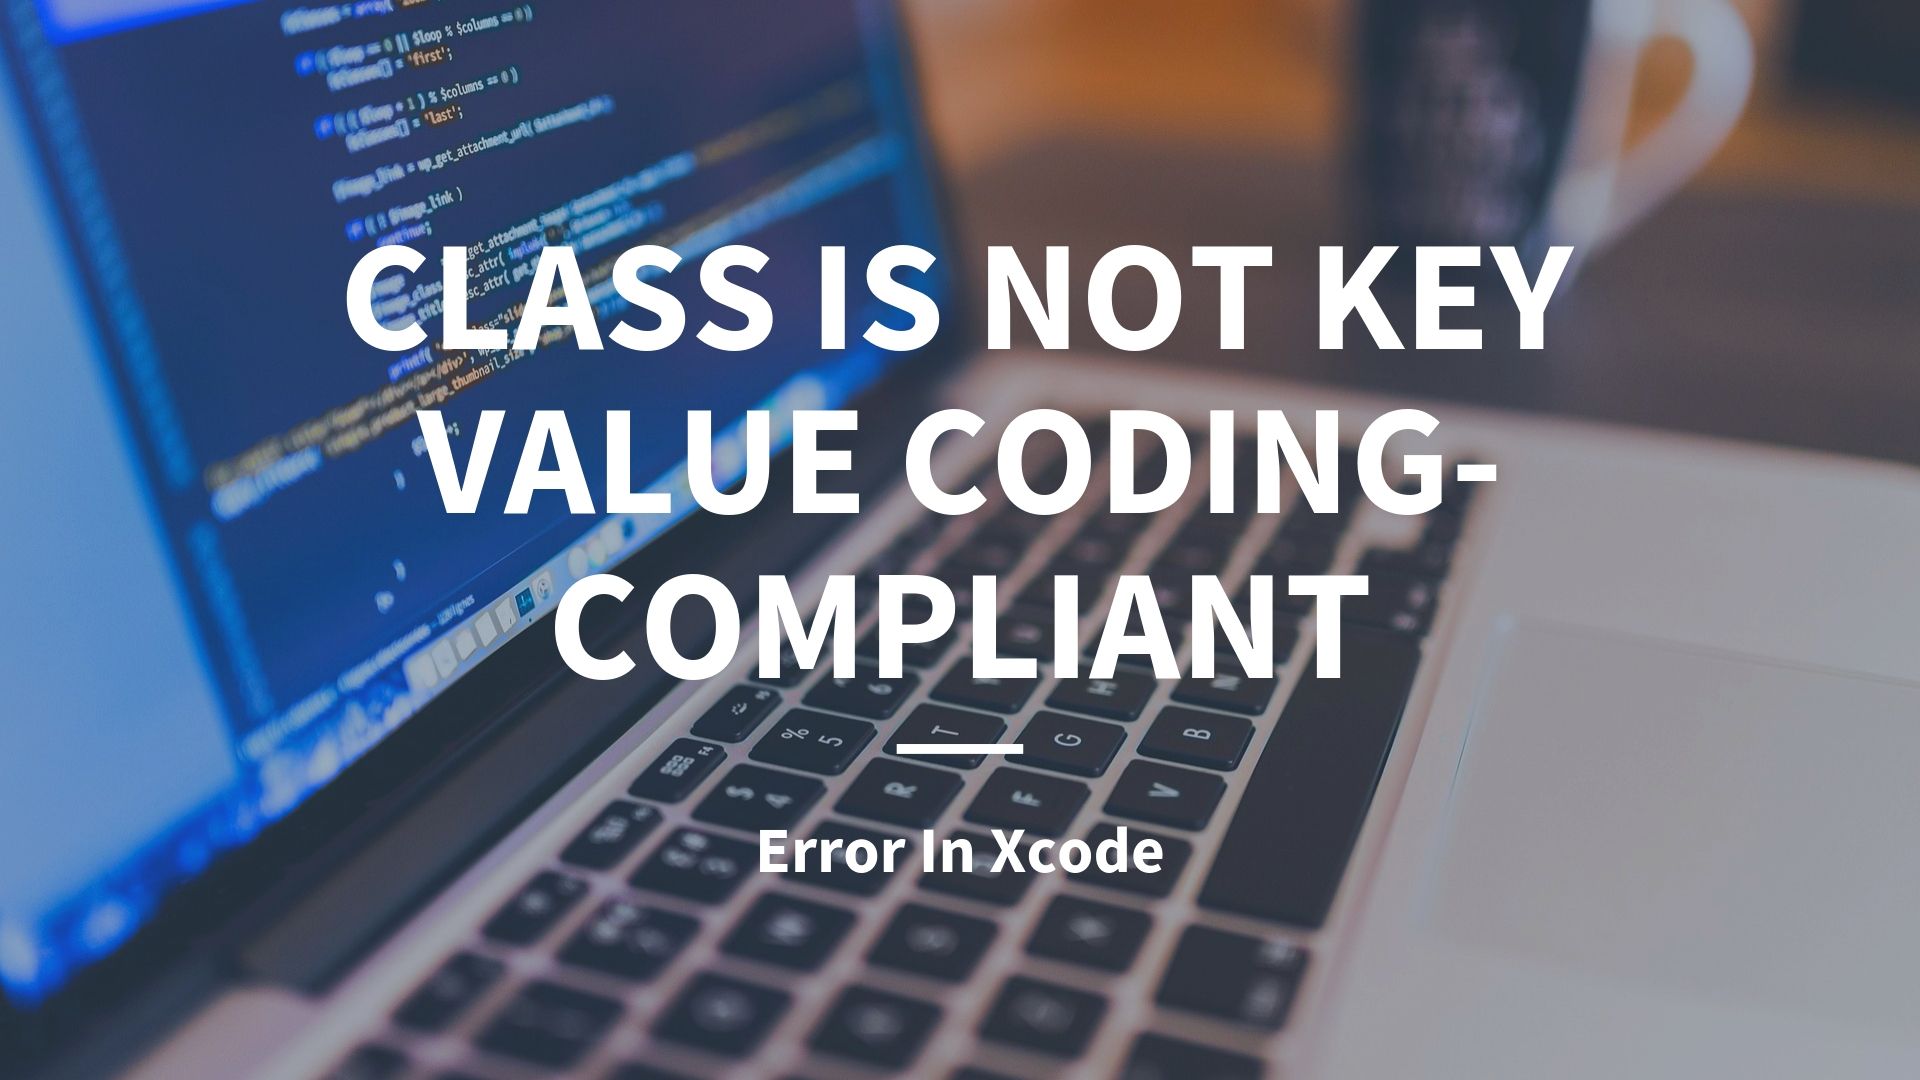 Fixing "This Class is not Key Value Coding-Compliant for the Key" Error In Xcode